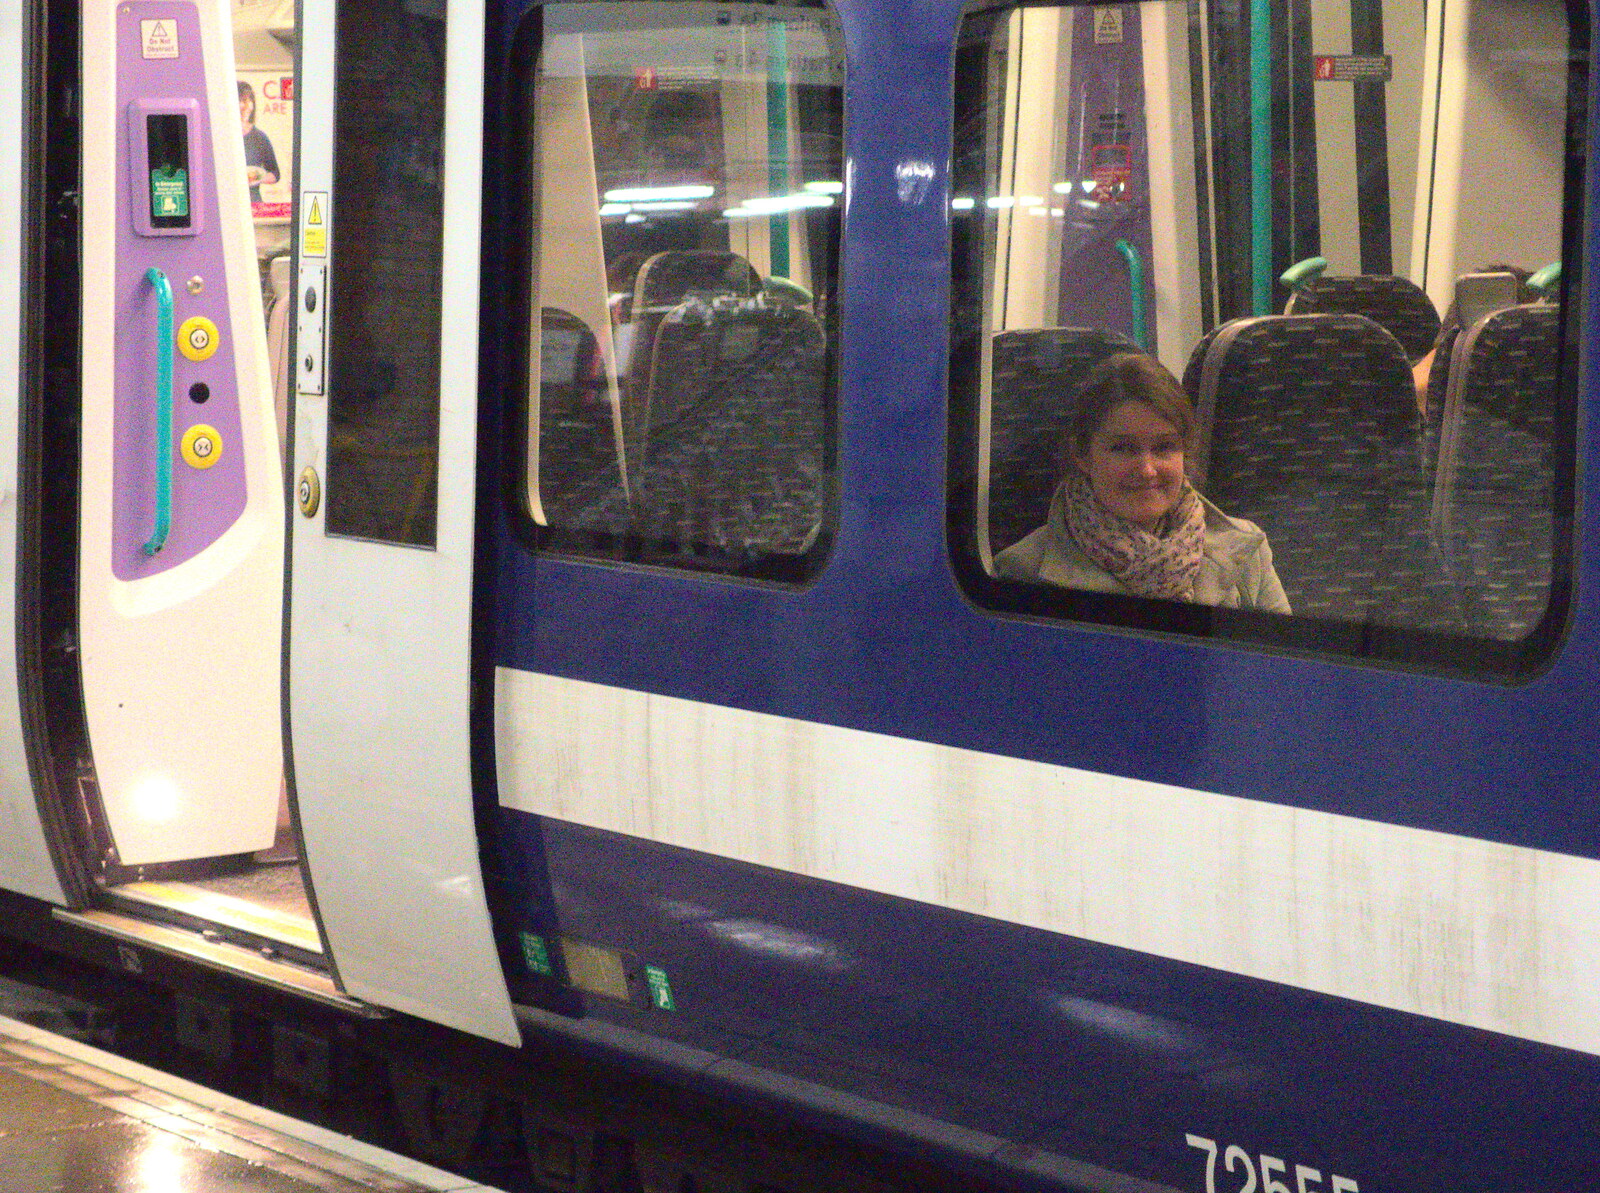 Isobel waits on the commuter train from Isobel Goes to Lyon, Ipswich Station, Burrell Road - 24th January 2016